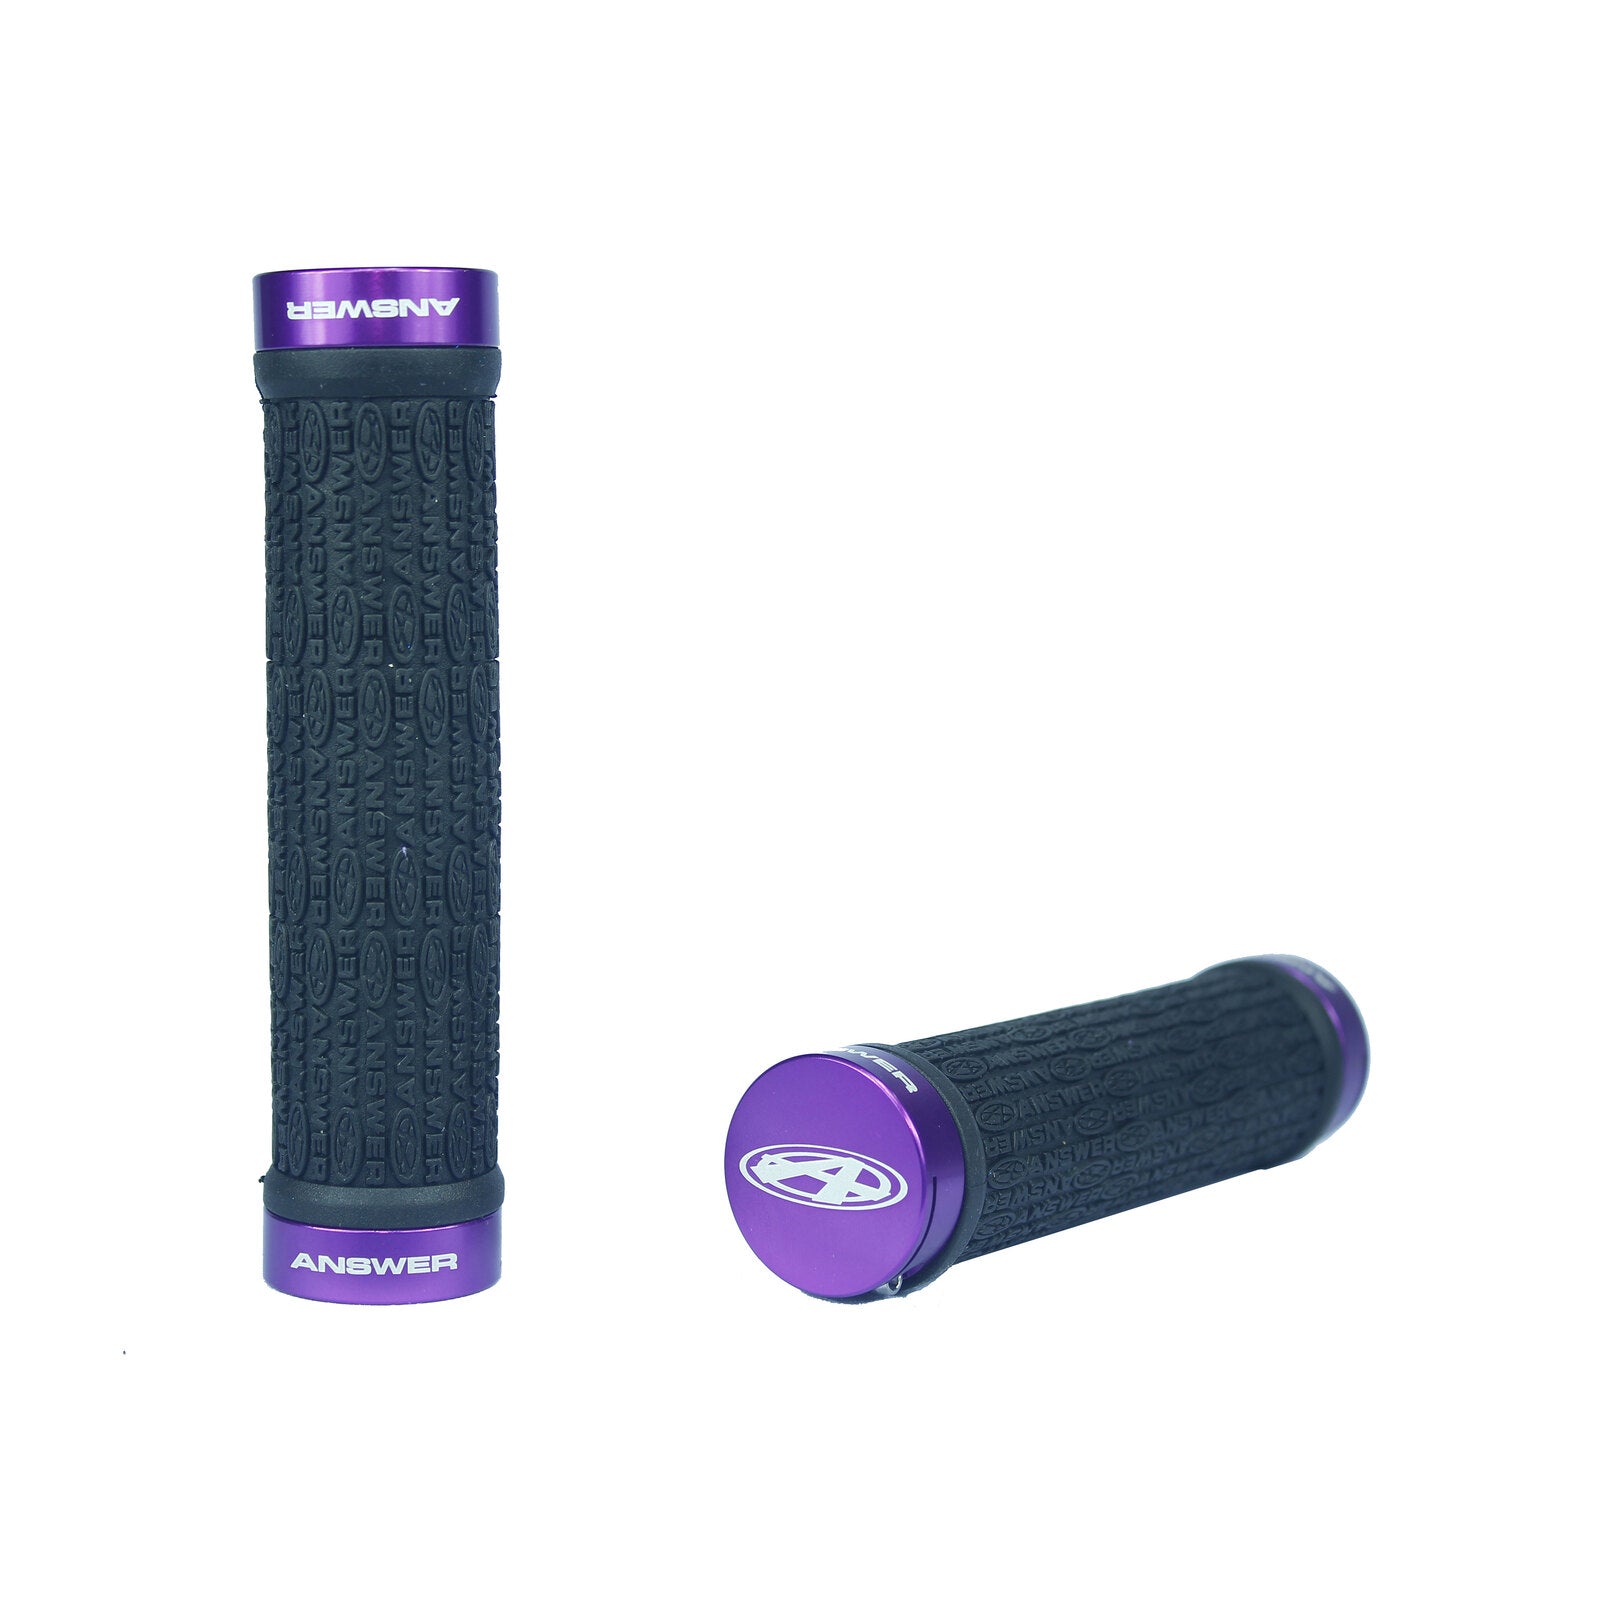 A pair of Answer Mini Lock-On Flangless Grips in purple and black on a white background.